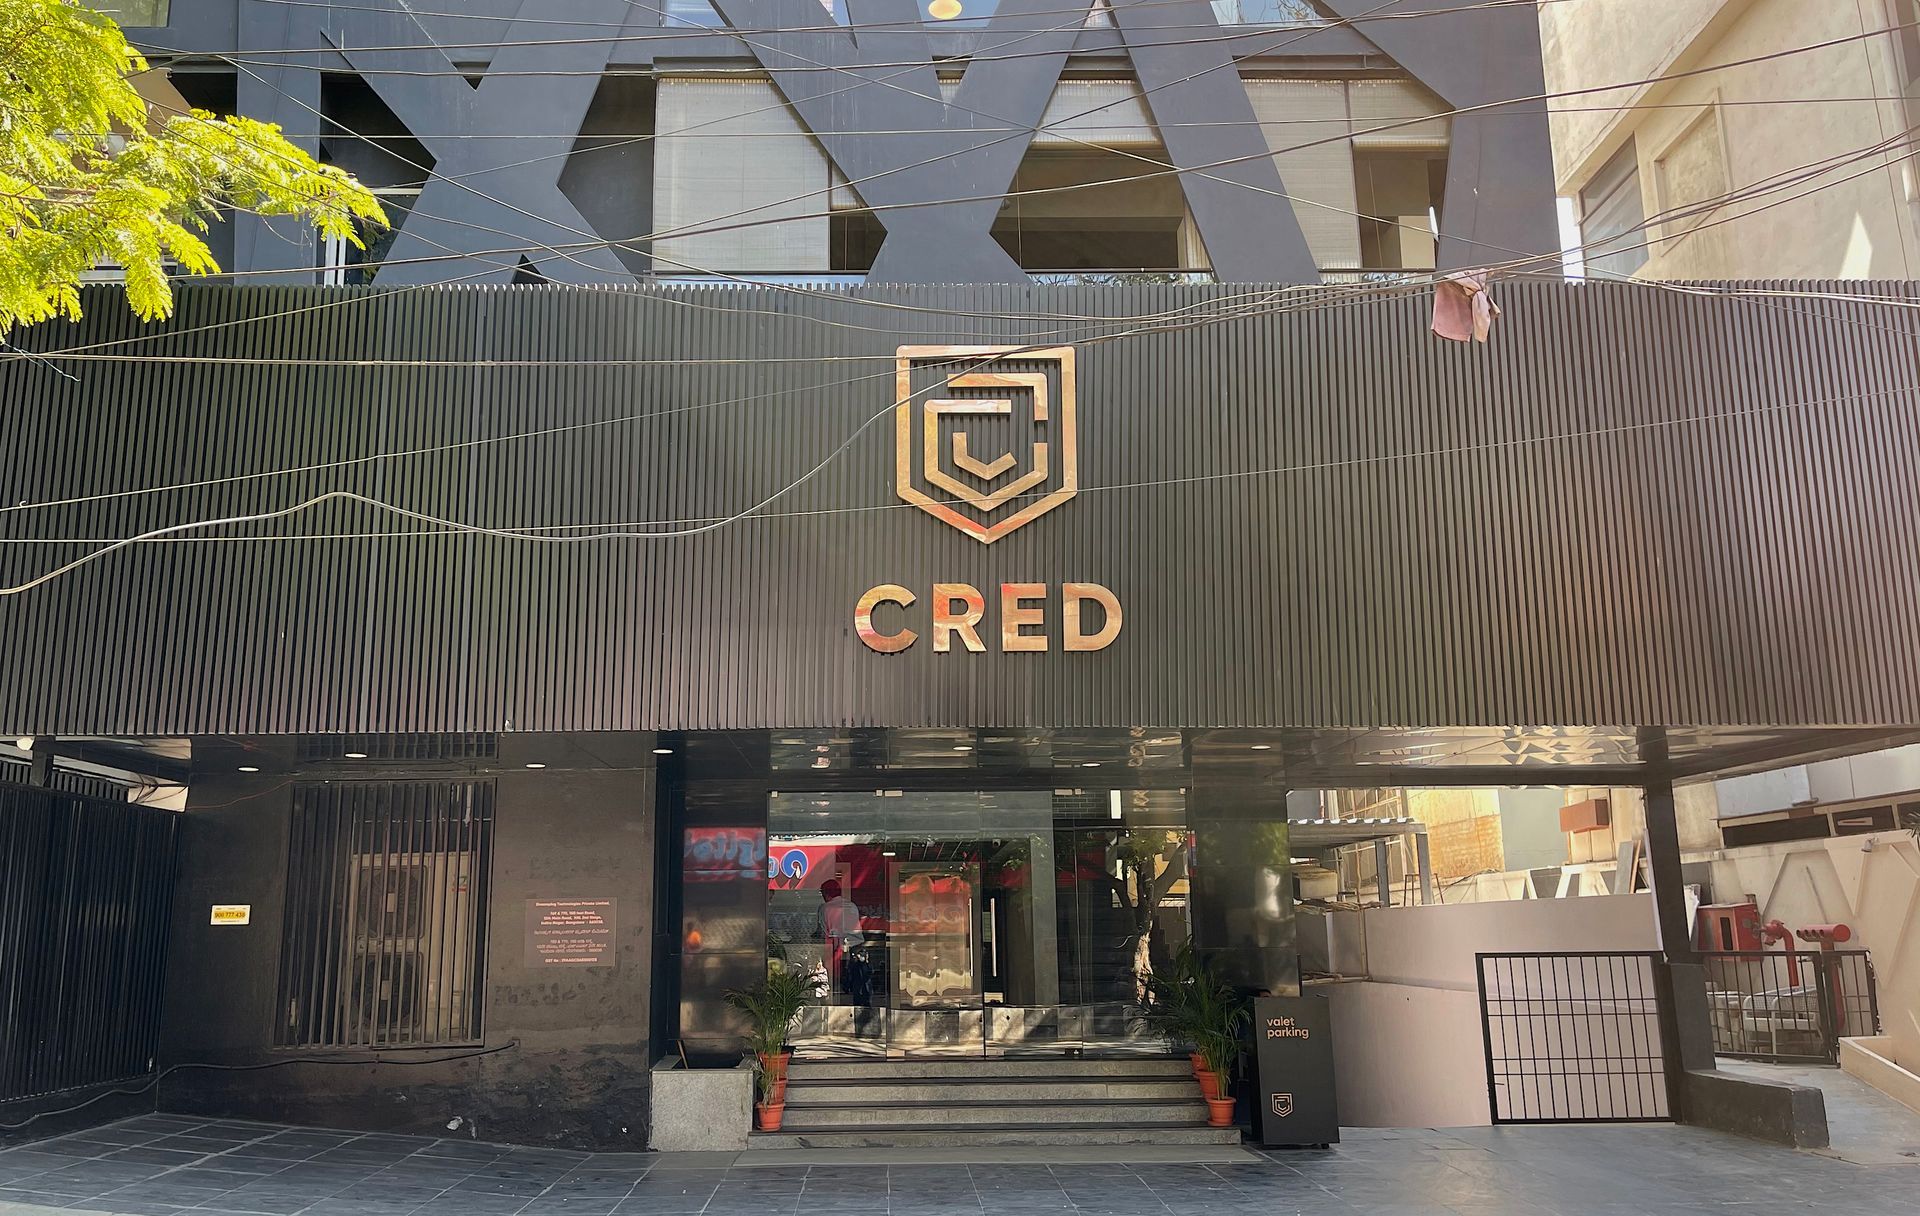 Today, we are covering how to use CRED coins in 2022, as well as answer the questions such as how do you use CRED coins on Amazon, and what is the value of 1 CRED coin.